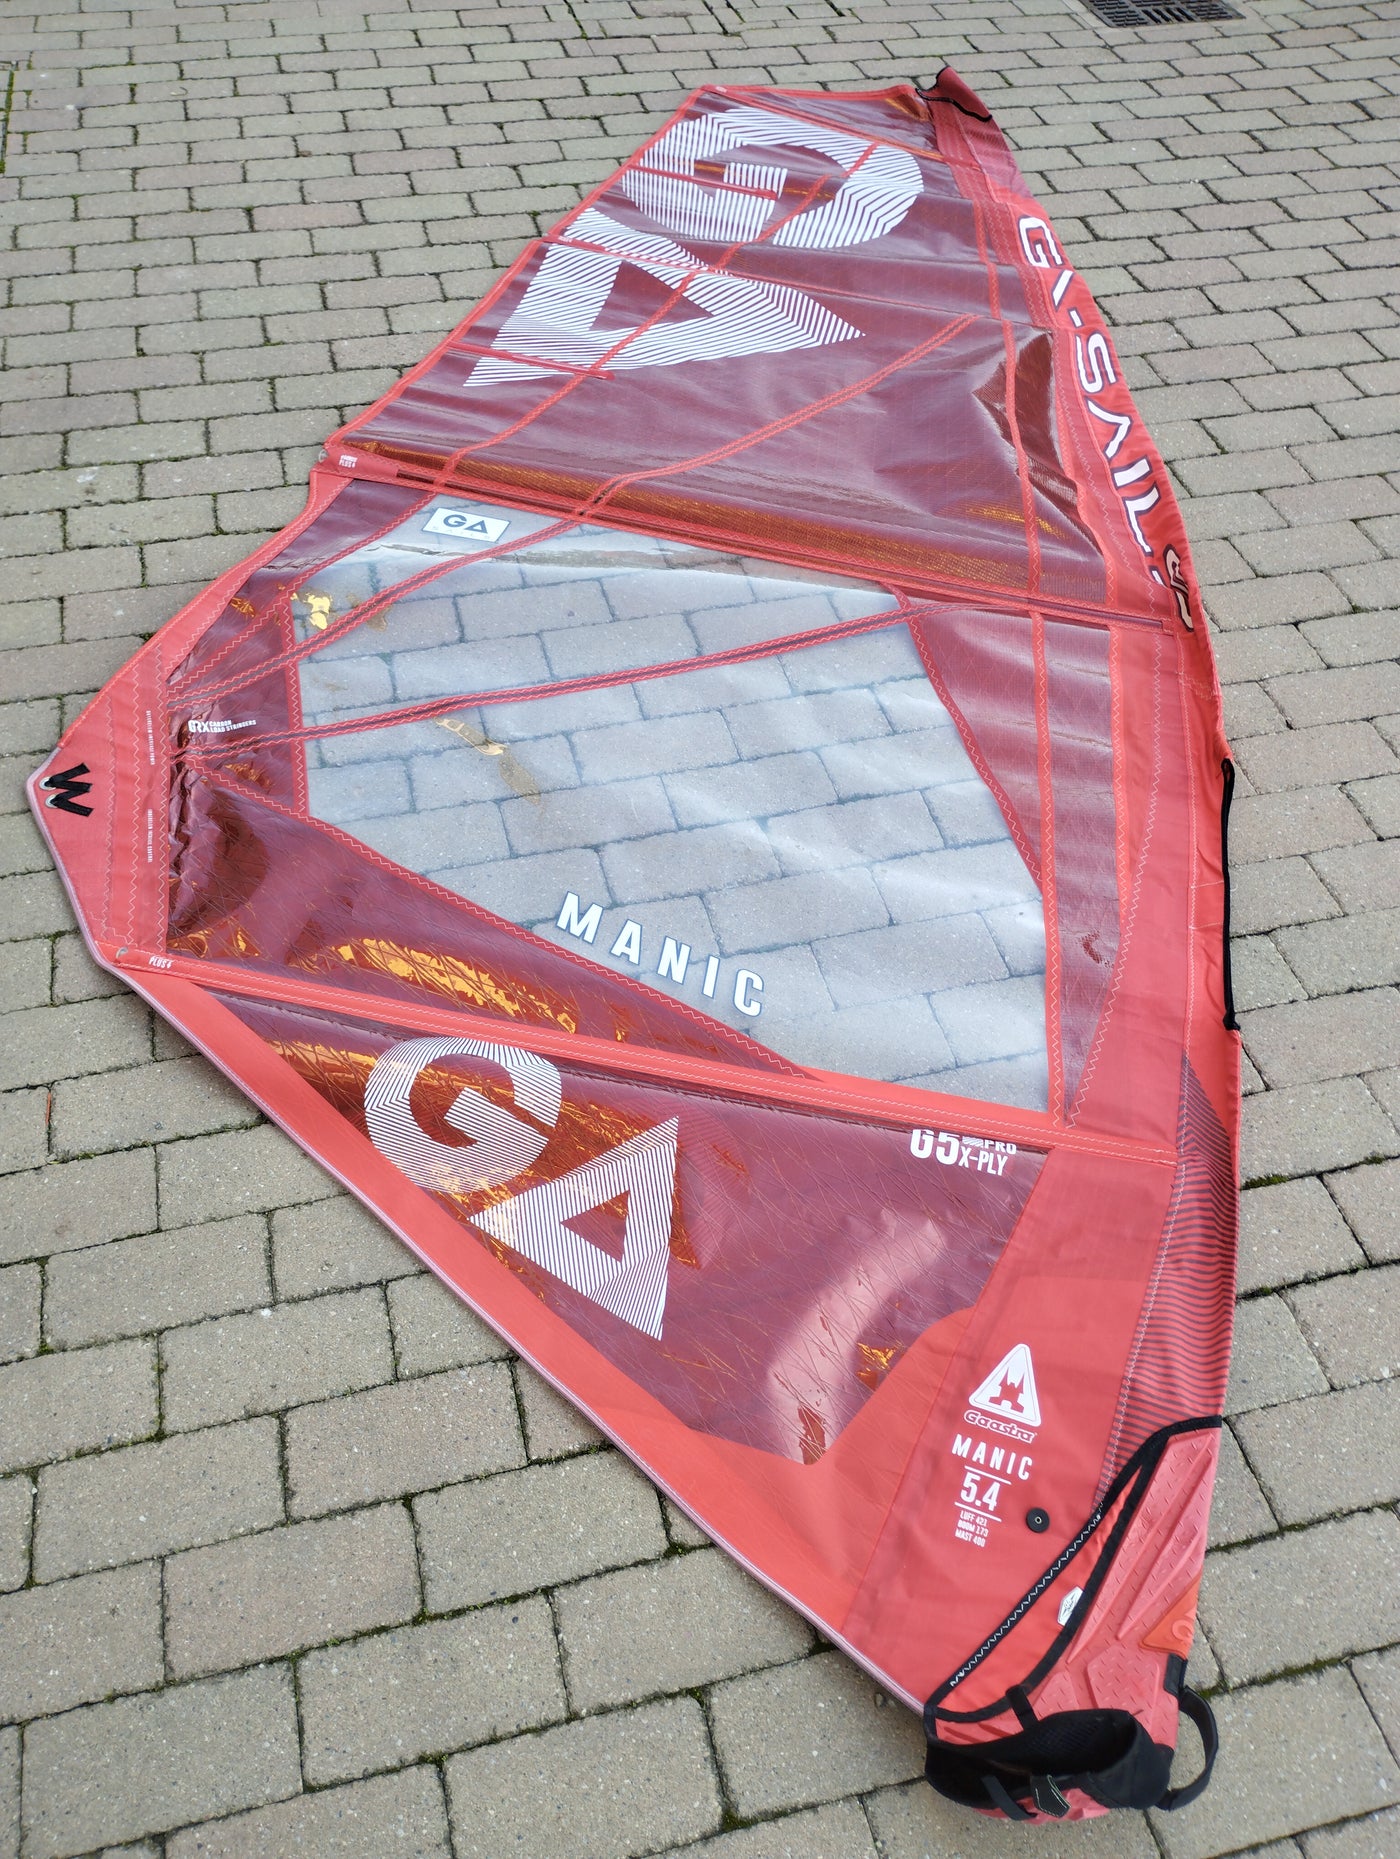 Windsurf sail GA Manic 5.4 - 2022 used, excellent condition